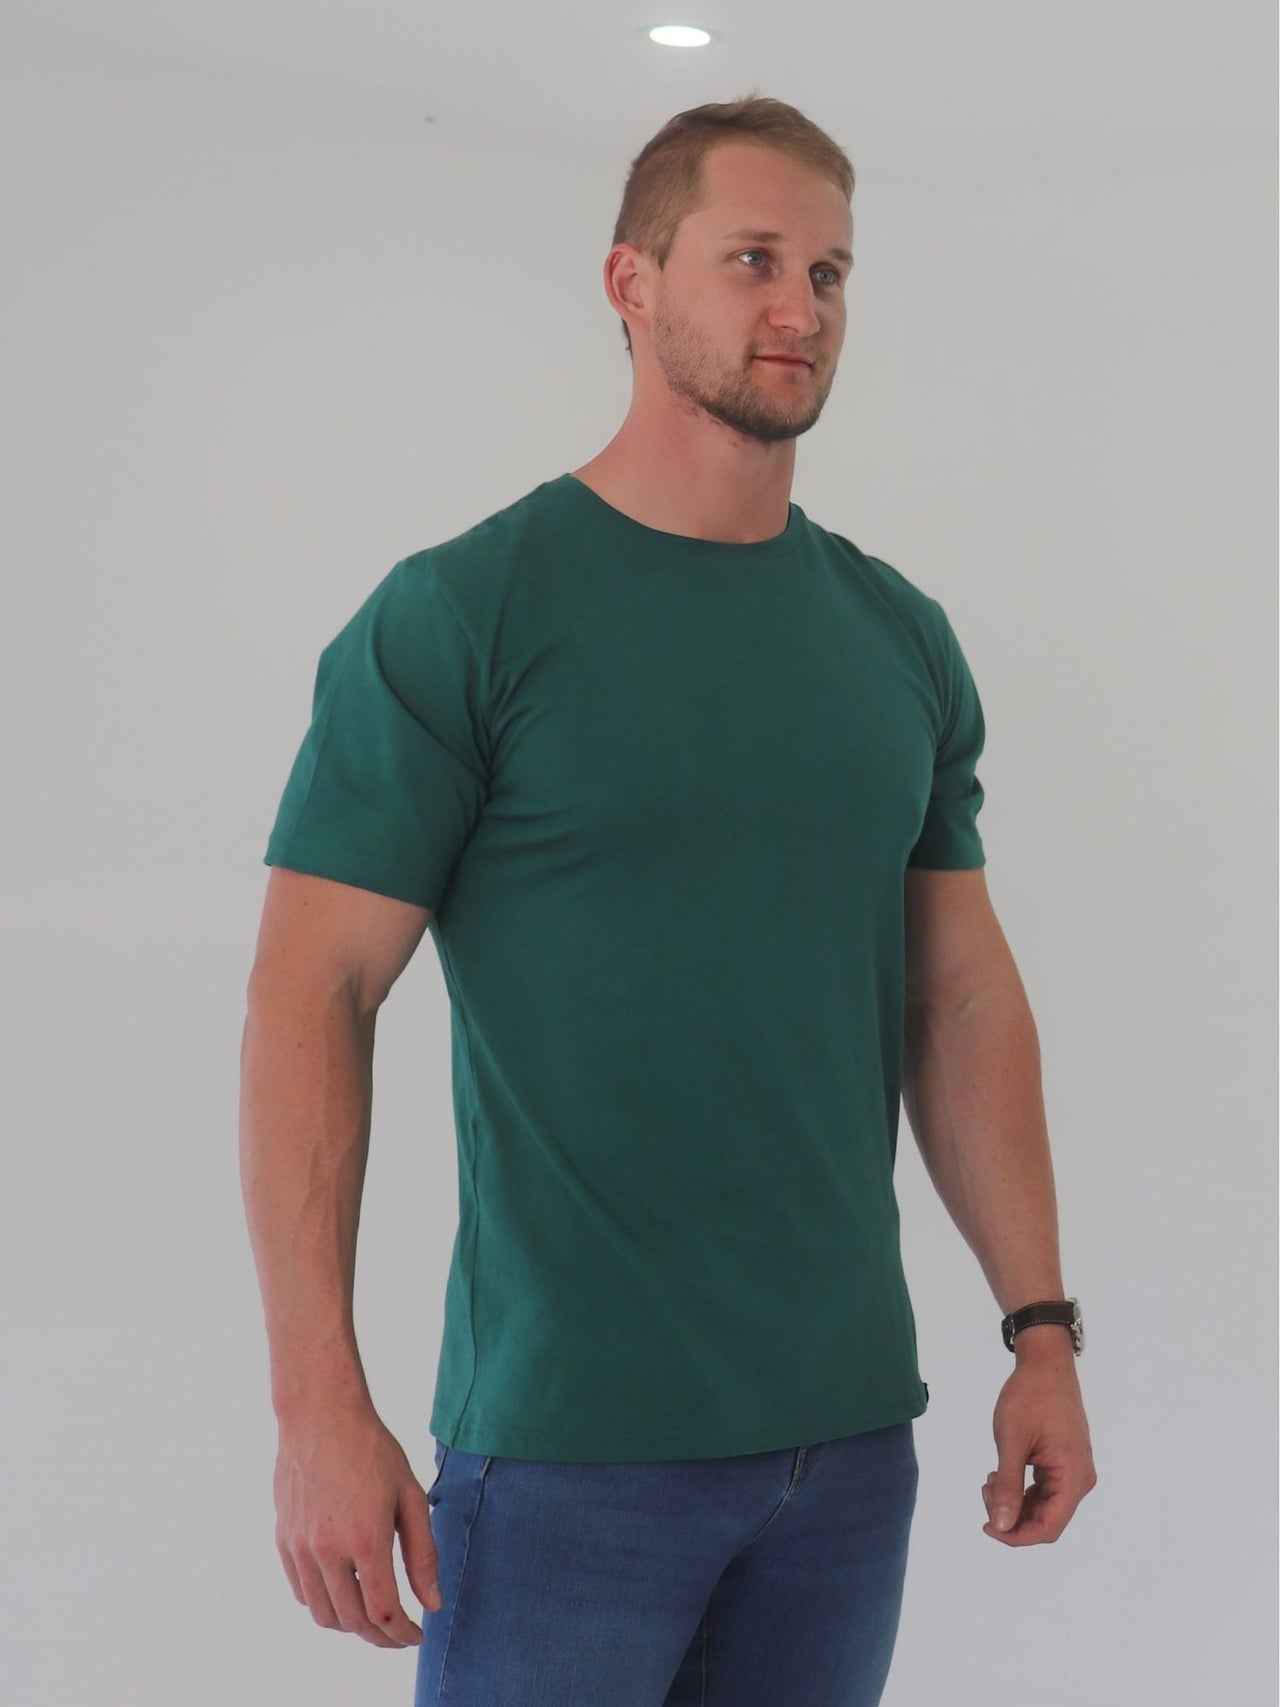 A tall and broad guy in the studio and wearing a dark green 2XL tall slim t-shirt.